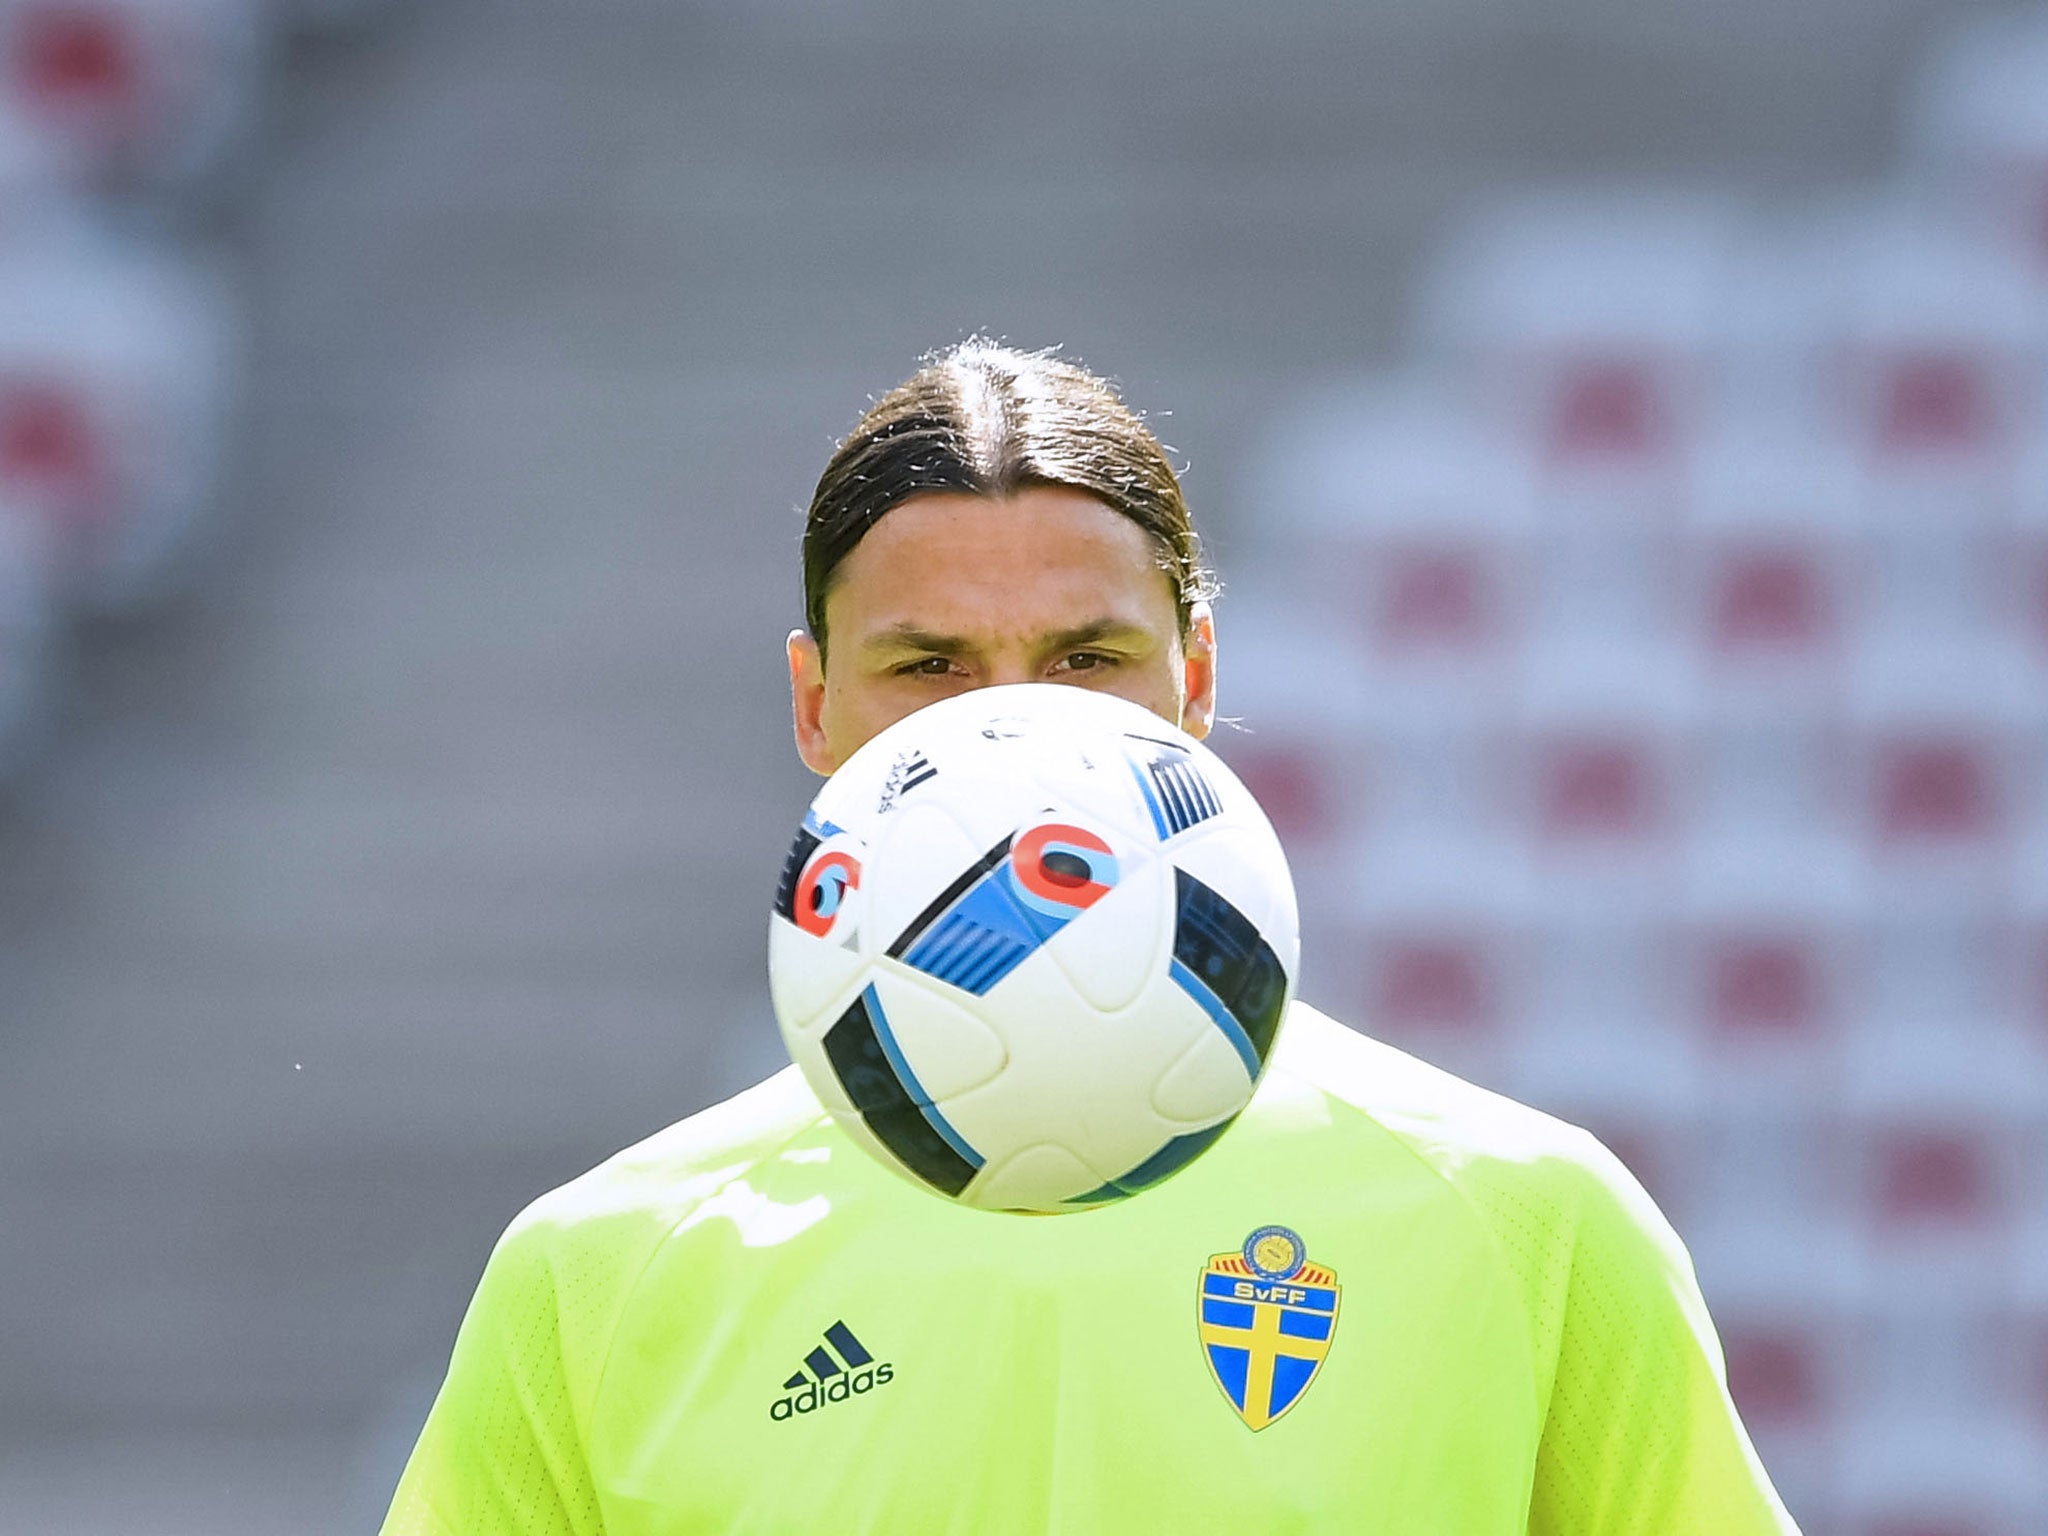 Zlatan Ibrahimovich will retire from international football at the end of Sweden's Euro 2016 campaign - which could come as soon as the end of the group stage